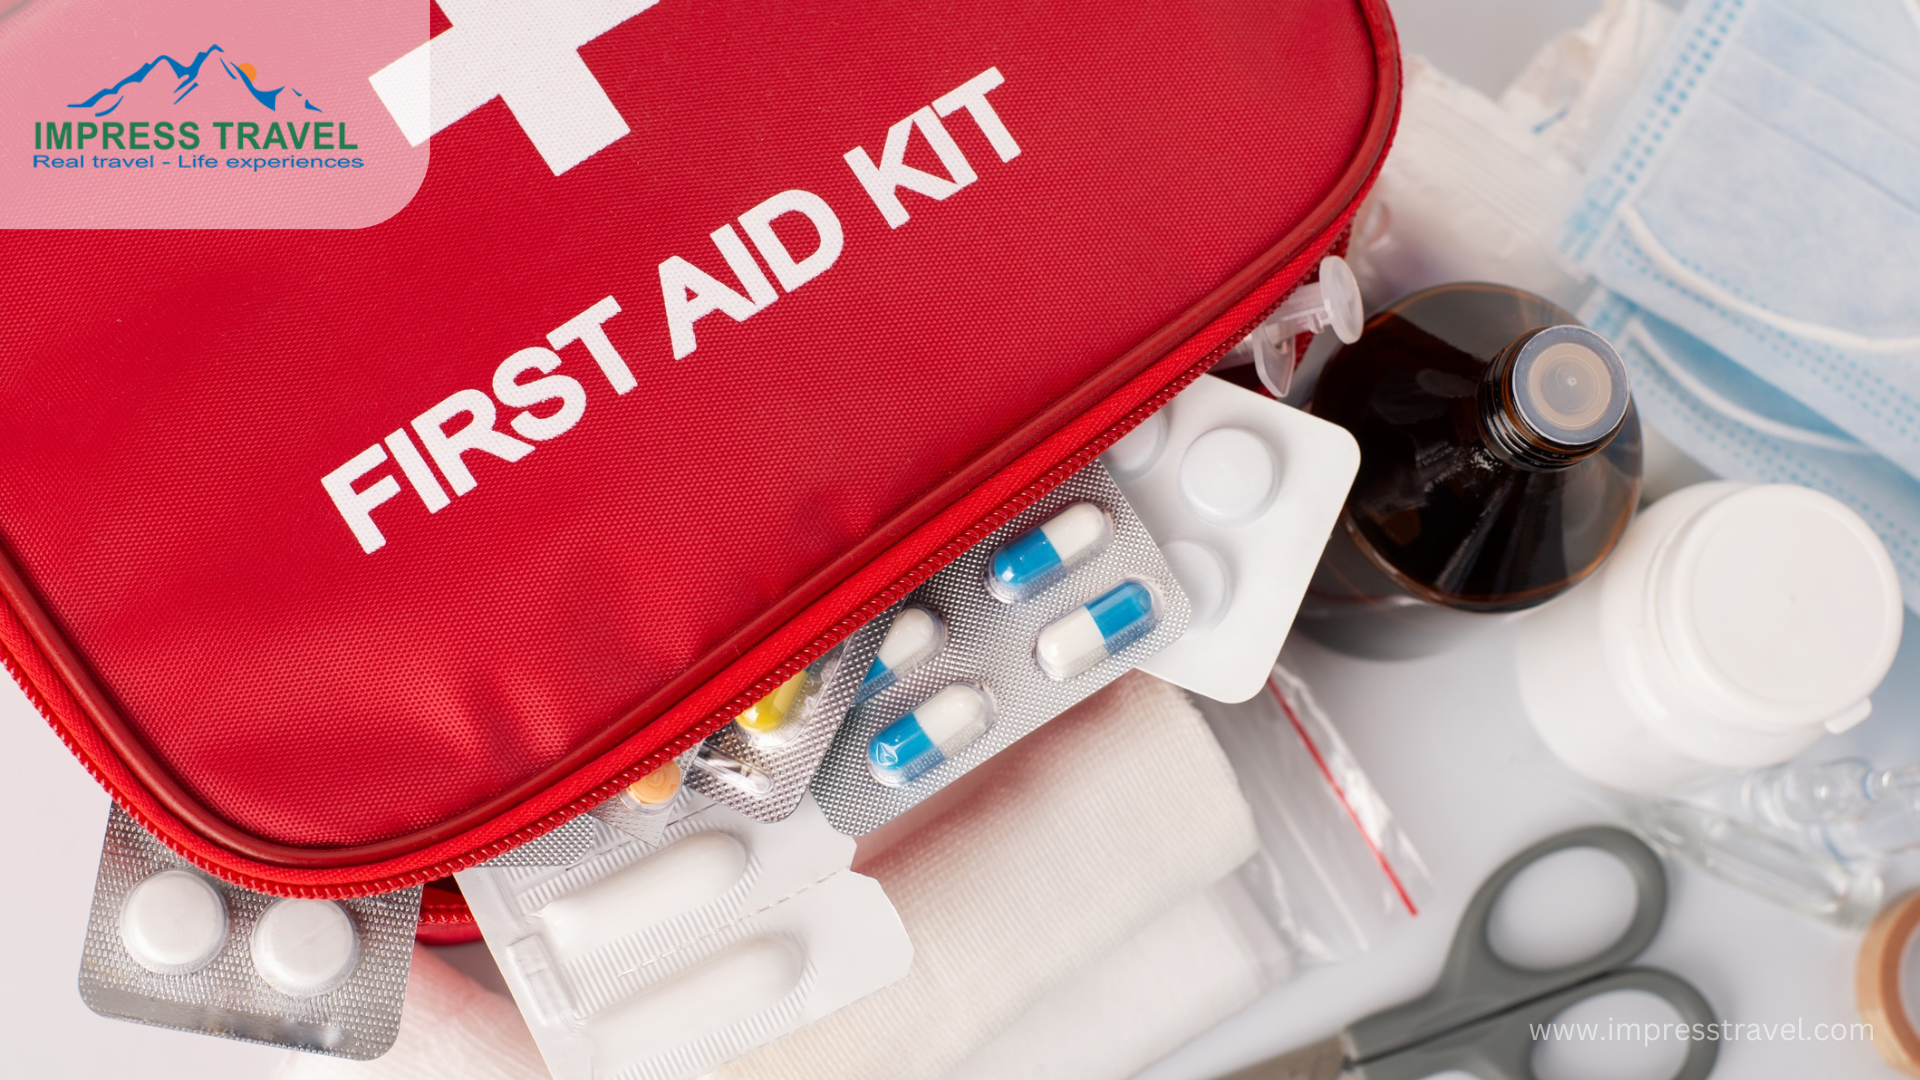 Bring standard medications and first aid kit